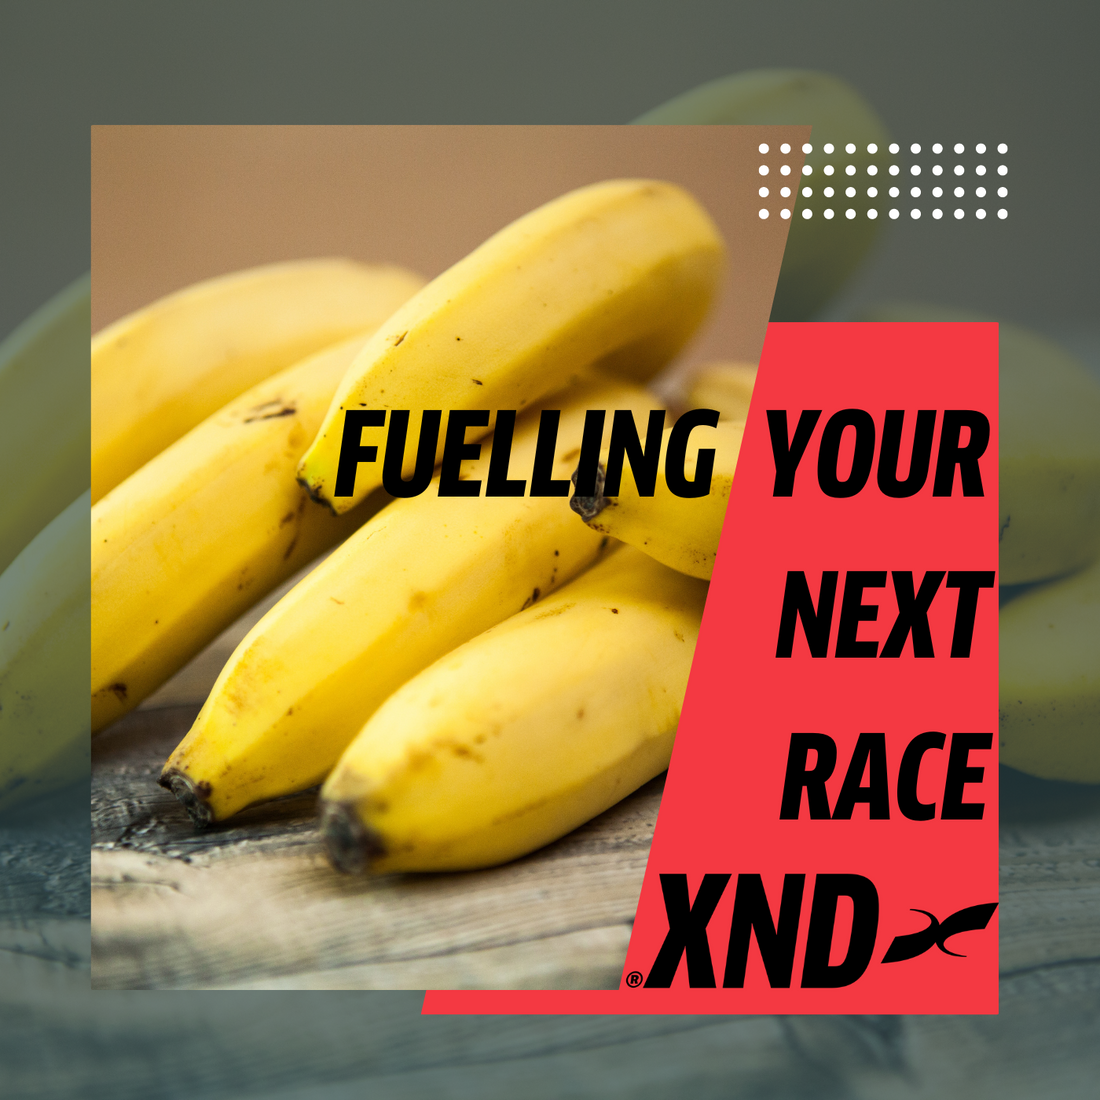 Fuelling your next race - Carbohydrates